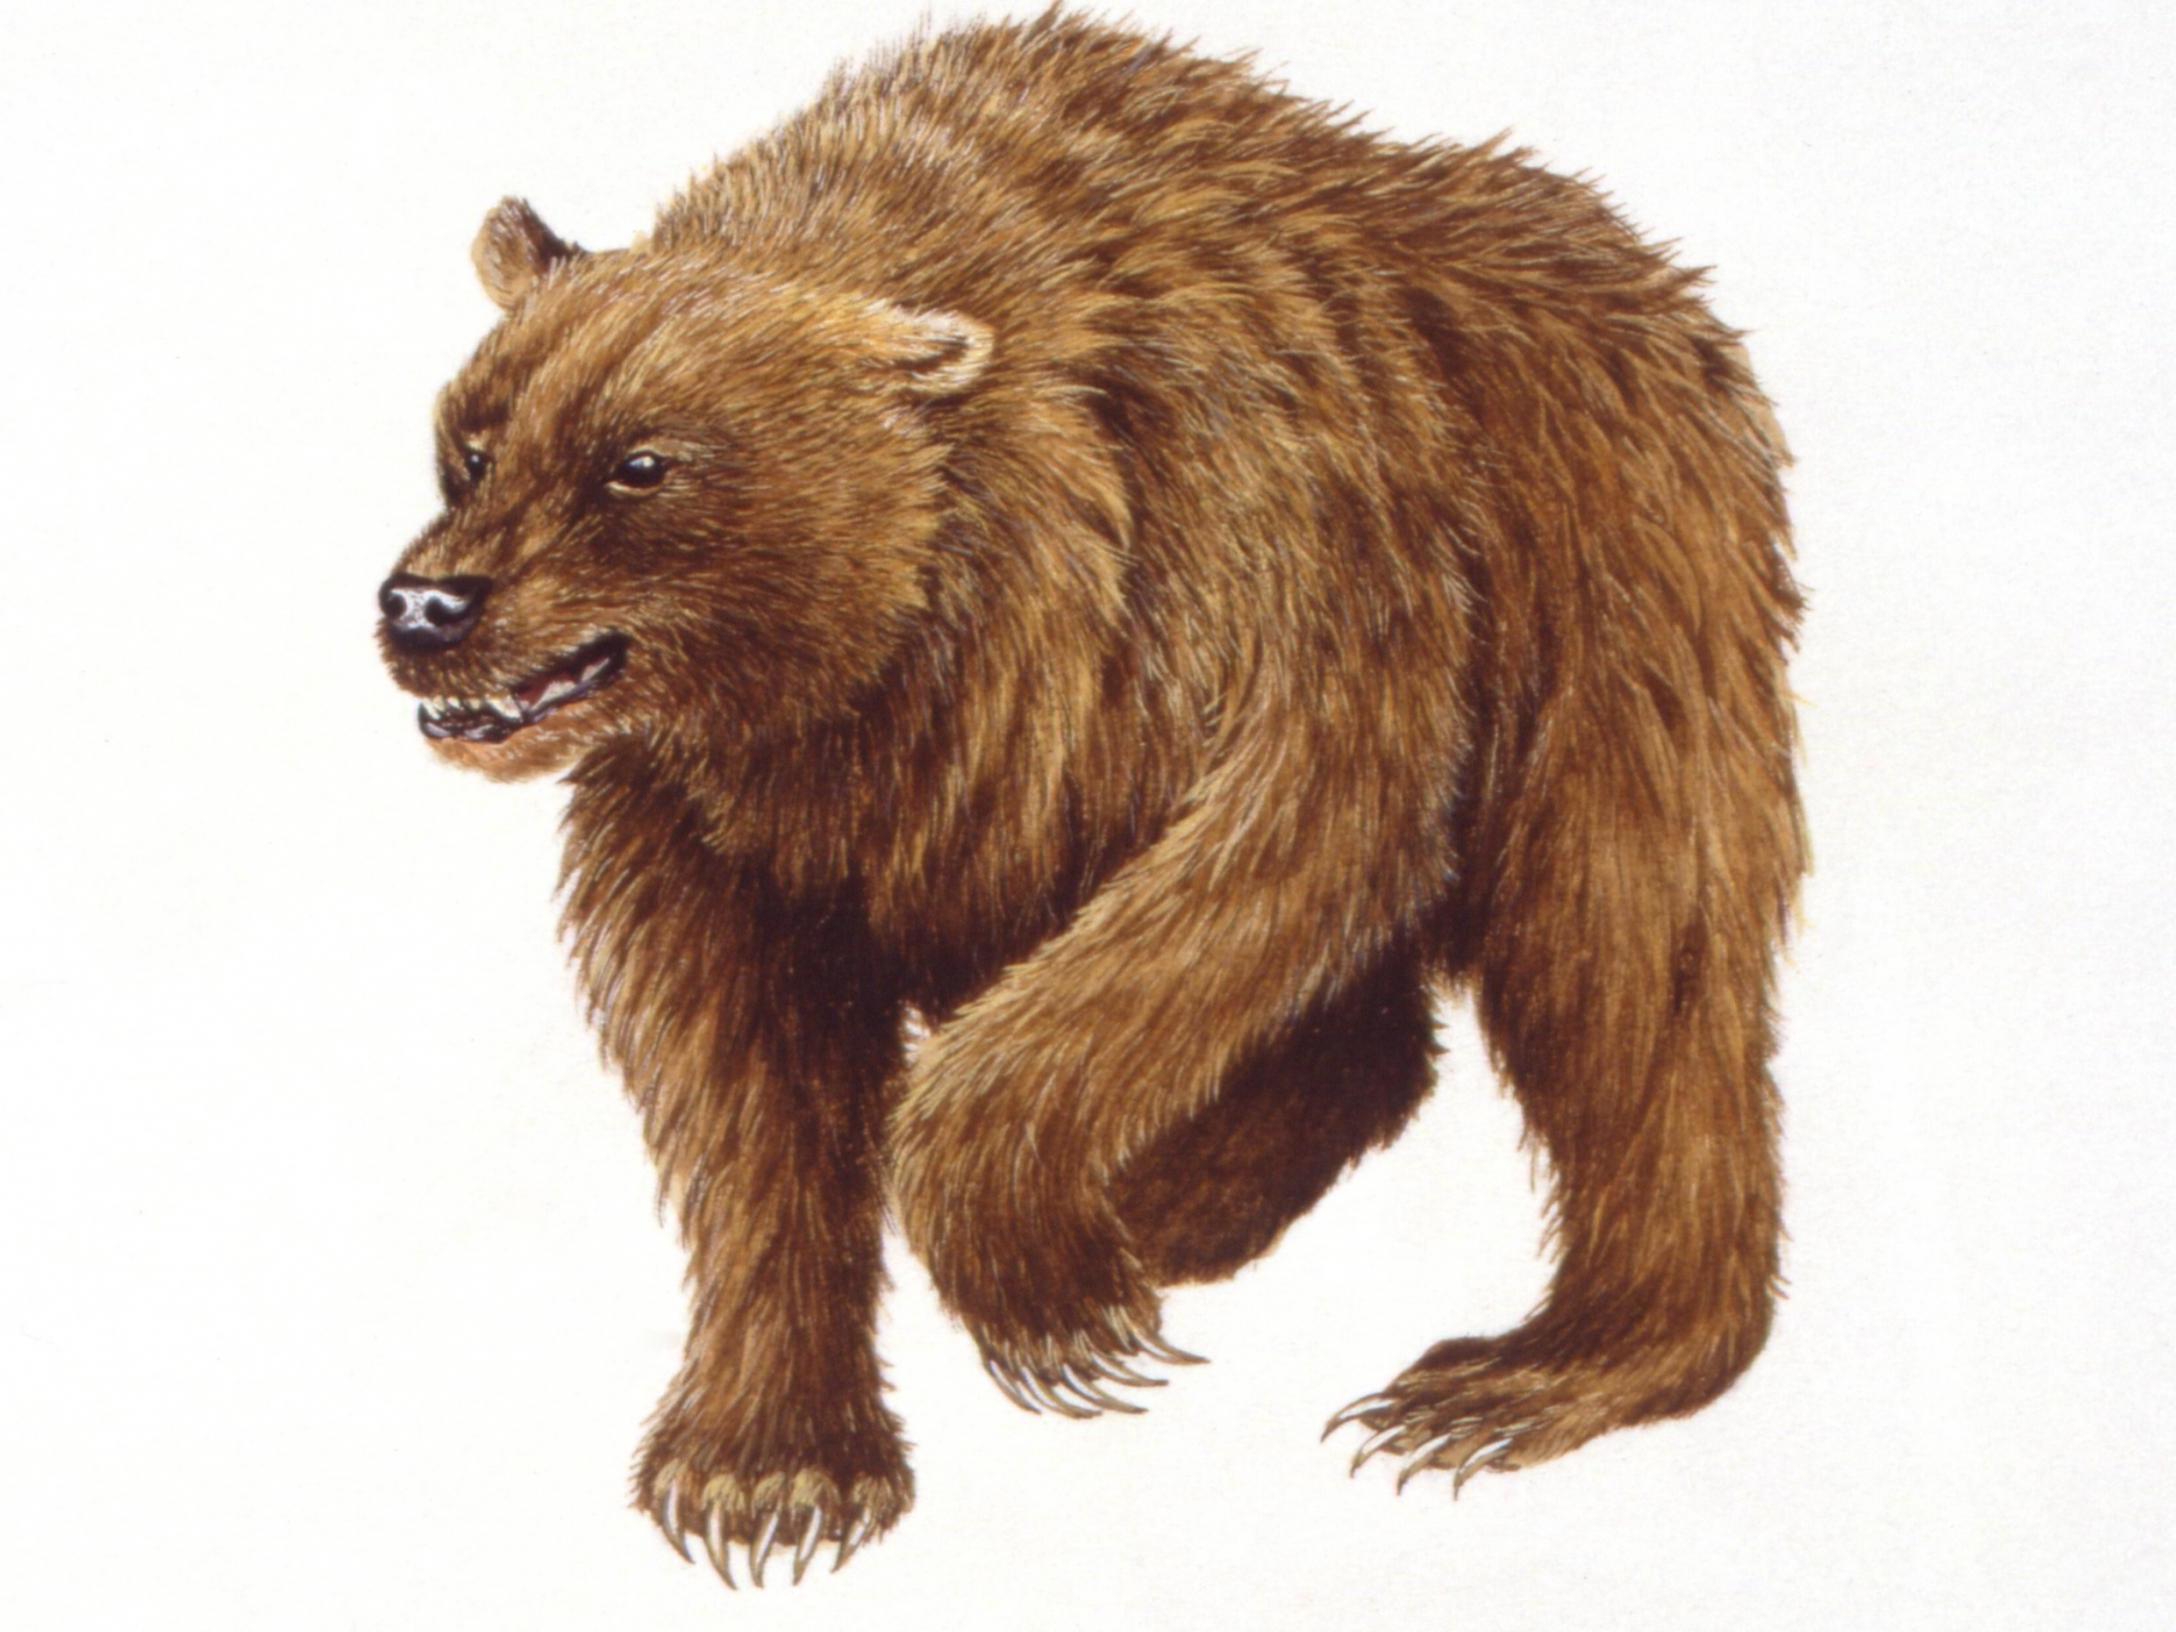 Cave bears would have inhabited more moderate climates with a rich supply of different plants